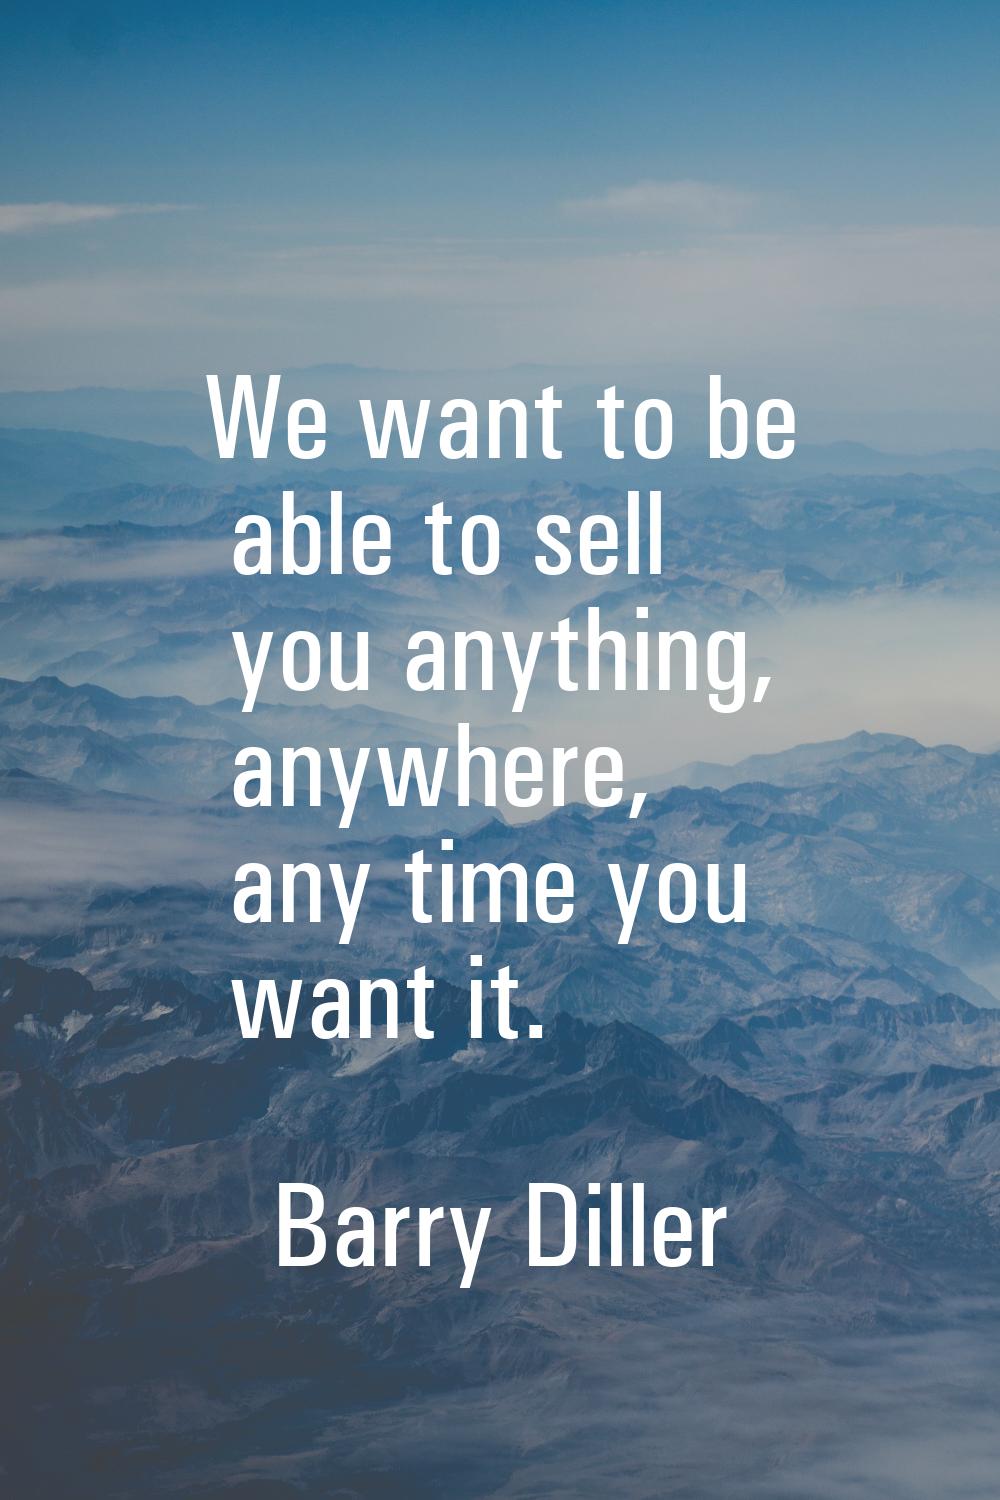 We want to be able to sell you anything, anywhere, any time you want it.